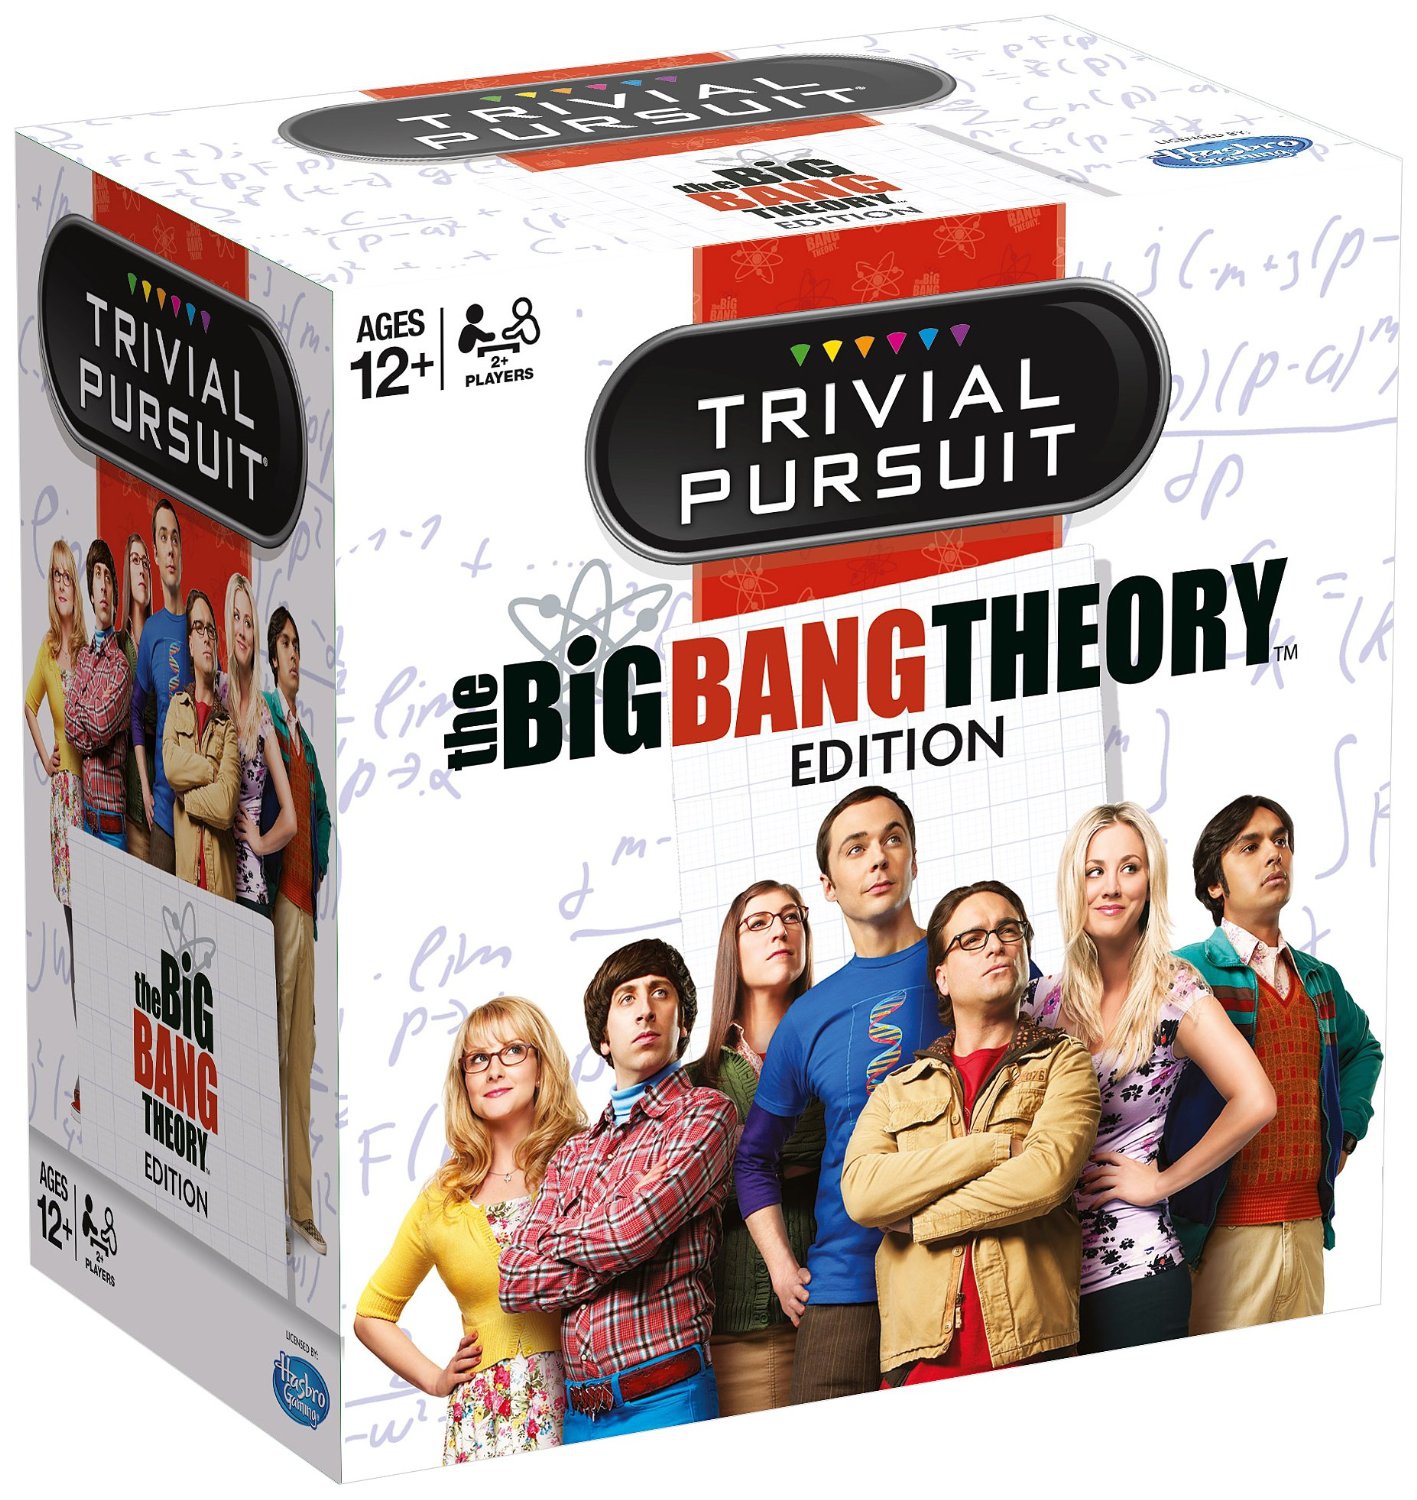 The Big Bang Theory 'Trivial Pursuit' Edition Card Game